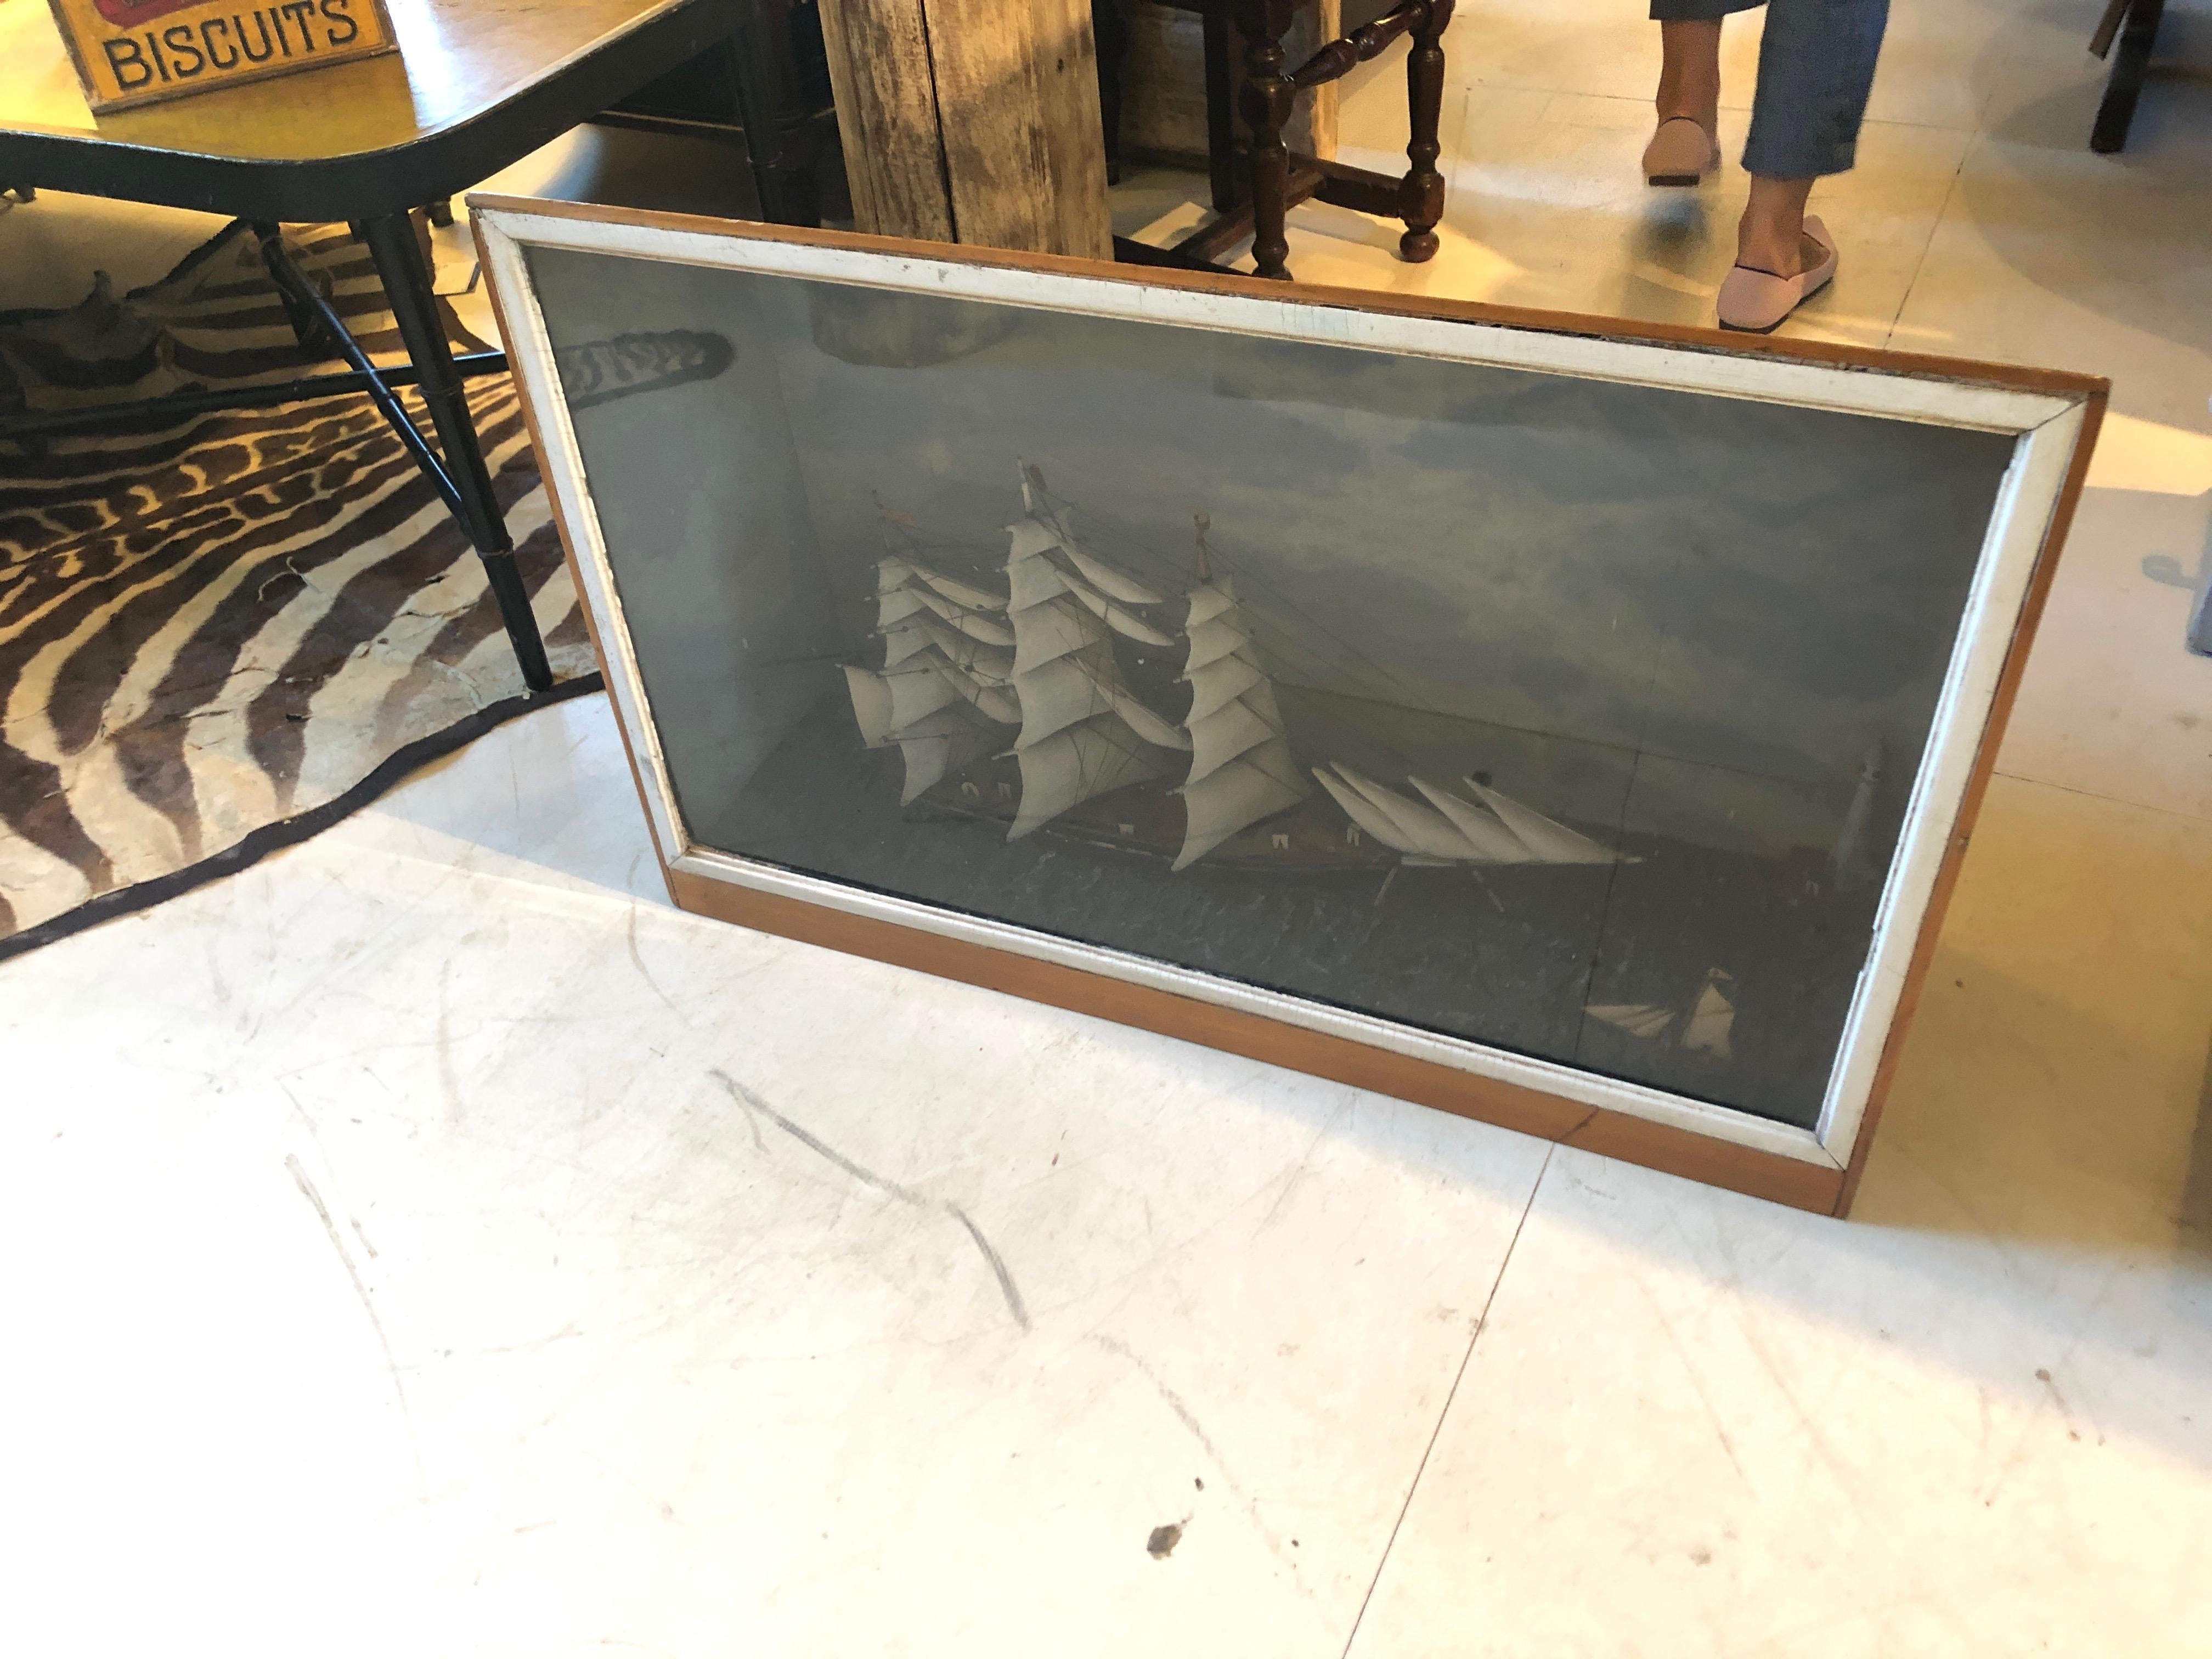 A very large impressive diorama or shadow box work of art with detailed sailing vessel.